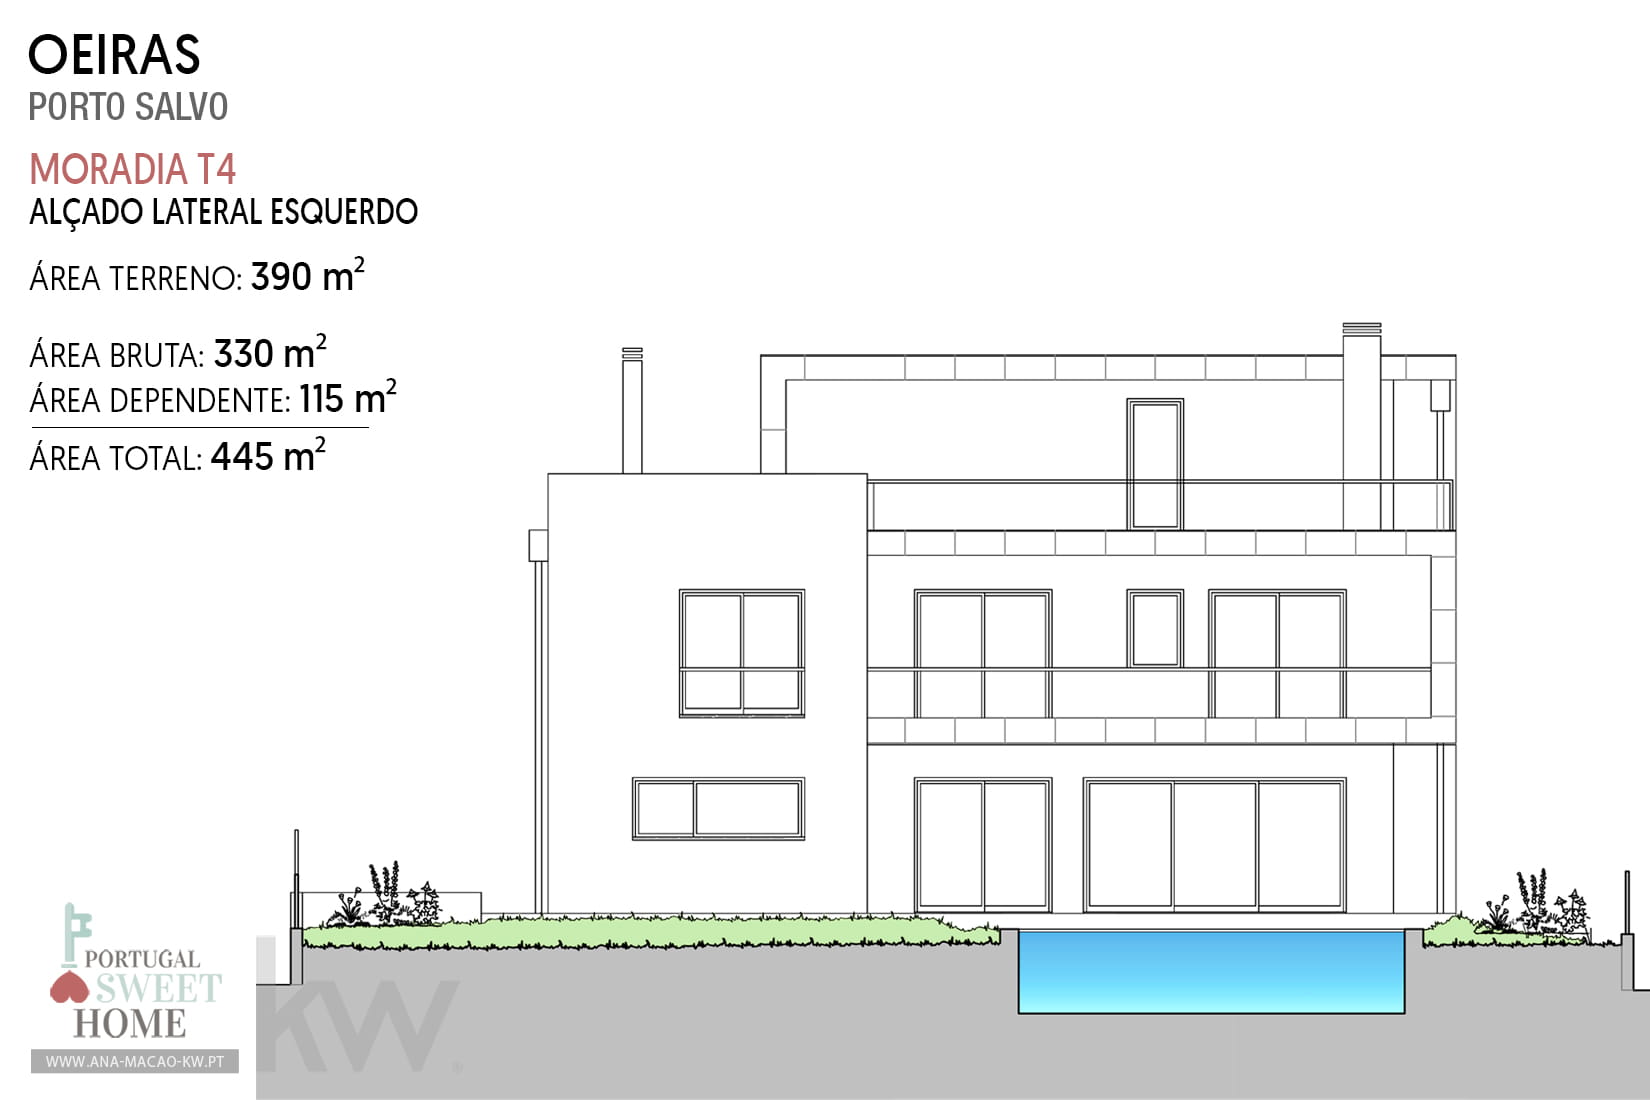 Left Side Elevation of the House